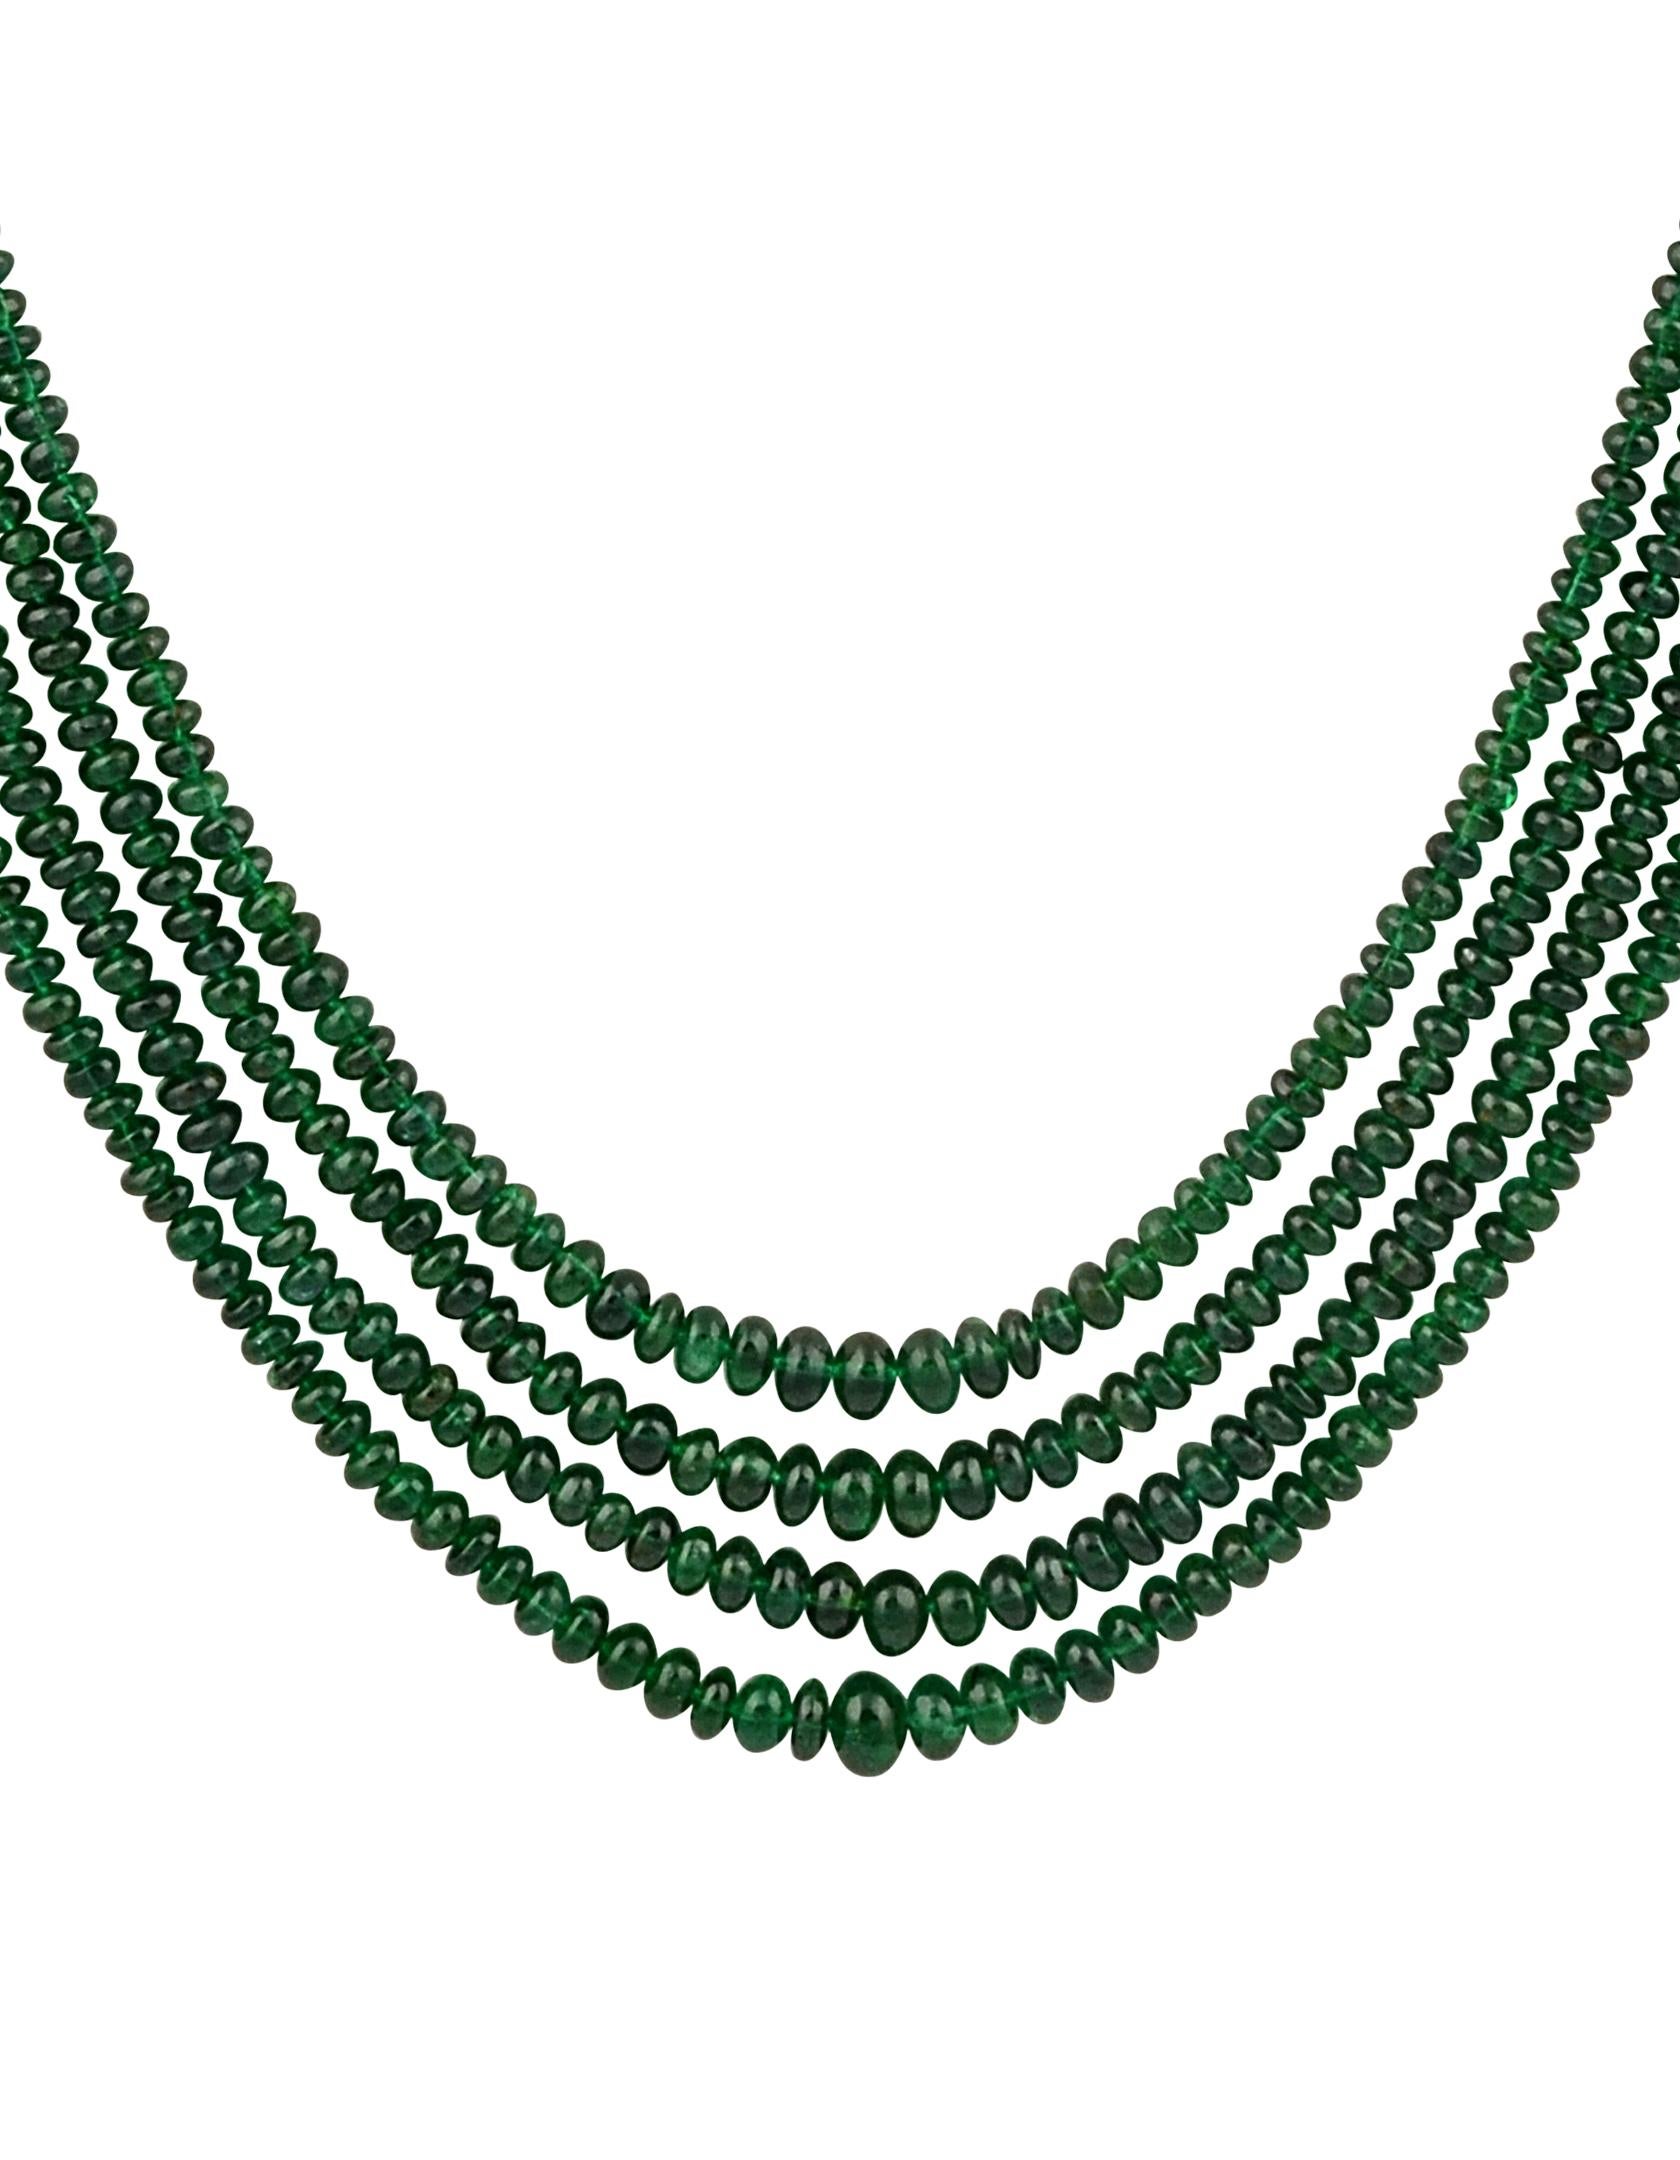 Approximately 250 Carat  very fine Emerald Beads 4 Line Necklace With 14 Karat Yellow Gold Clasp Adjustable with multiple links
This spectacular Necklace   consisting of approximately 250 Ct  of fine beads.
The shine sparkle and brilliance with deep